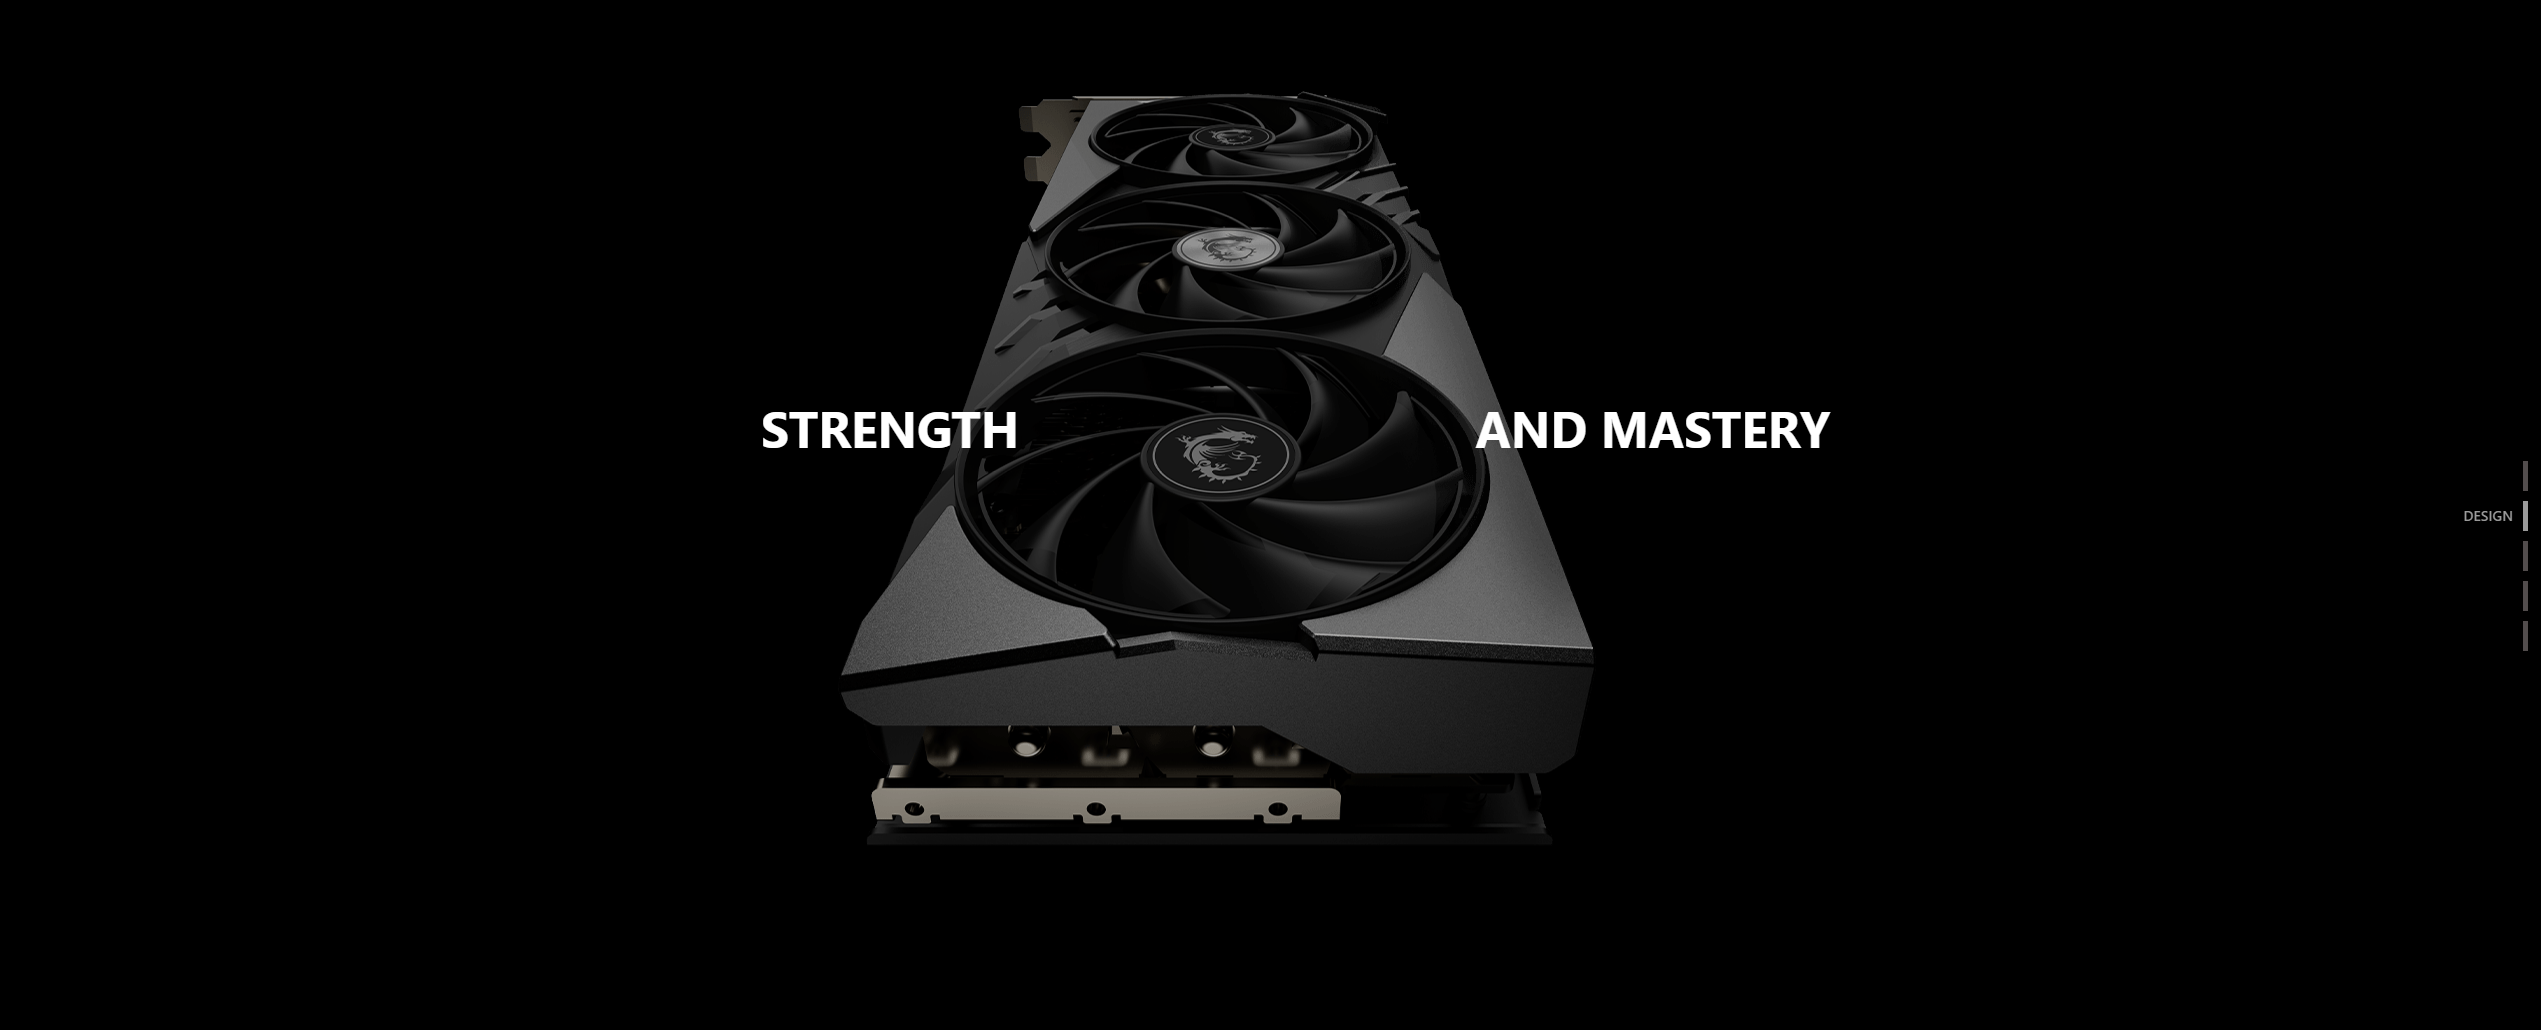 A large marketing image providing additional information about the product MSI GeForce RTX 4060 Ti Gaming X Slim 8GB GDDR6 - Black - Additional alt info not provided